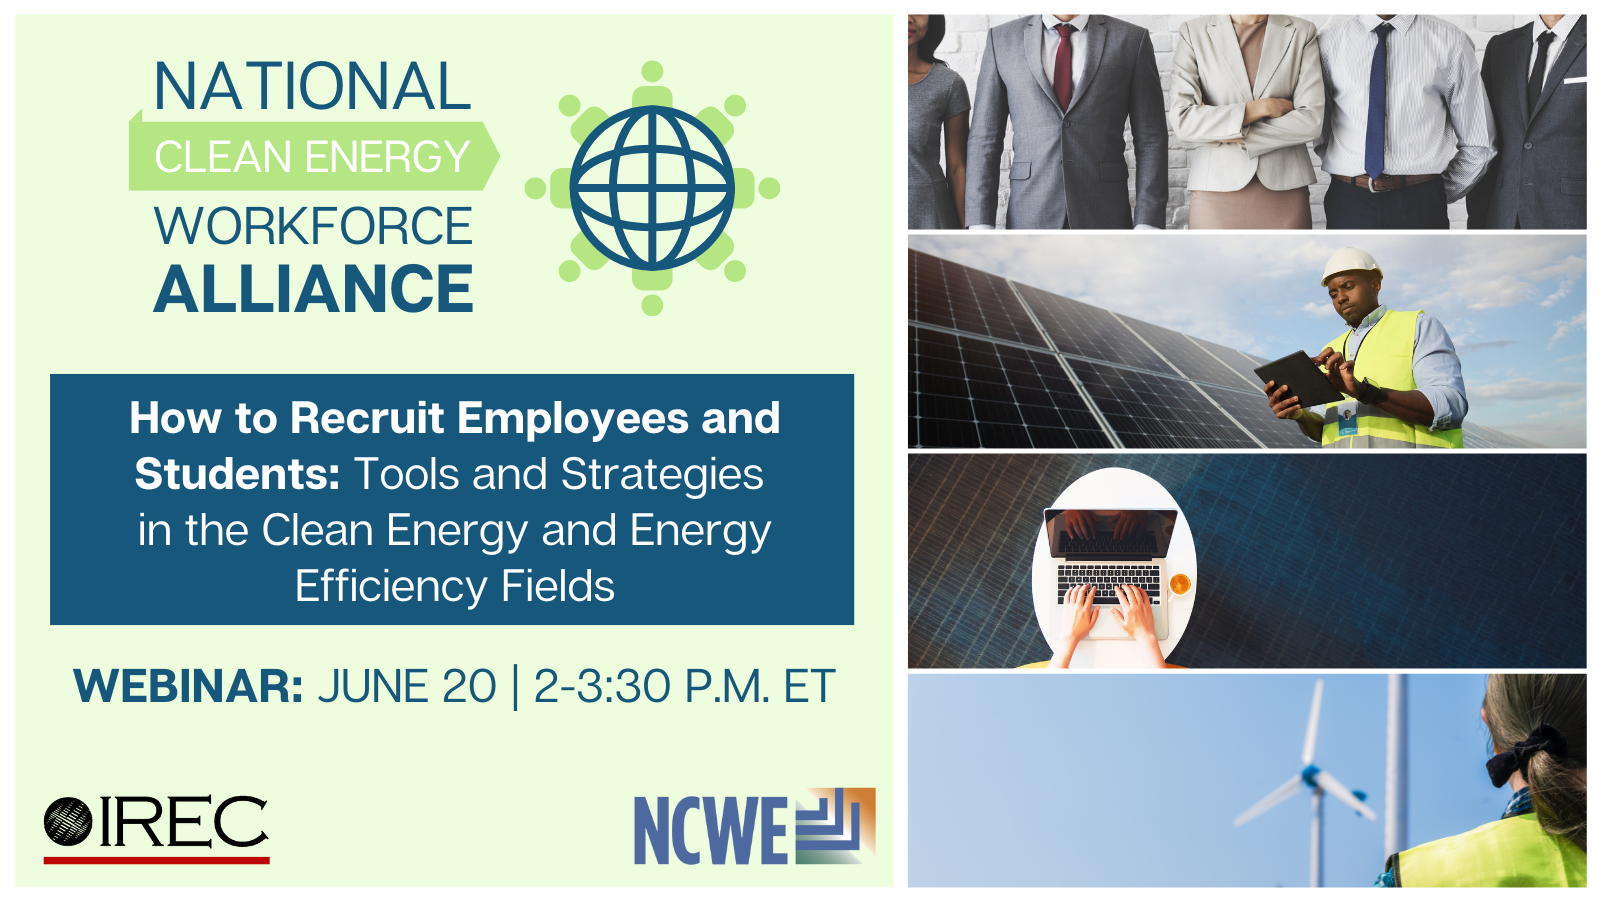 How to Recruit Employees and Students: Tools and Strategies in the Clean Energy and Energy Efficiency Fields Webinar